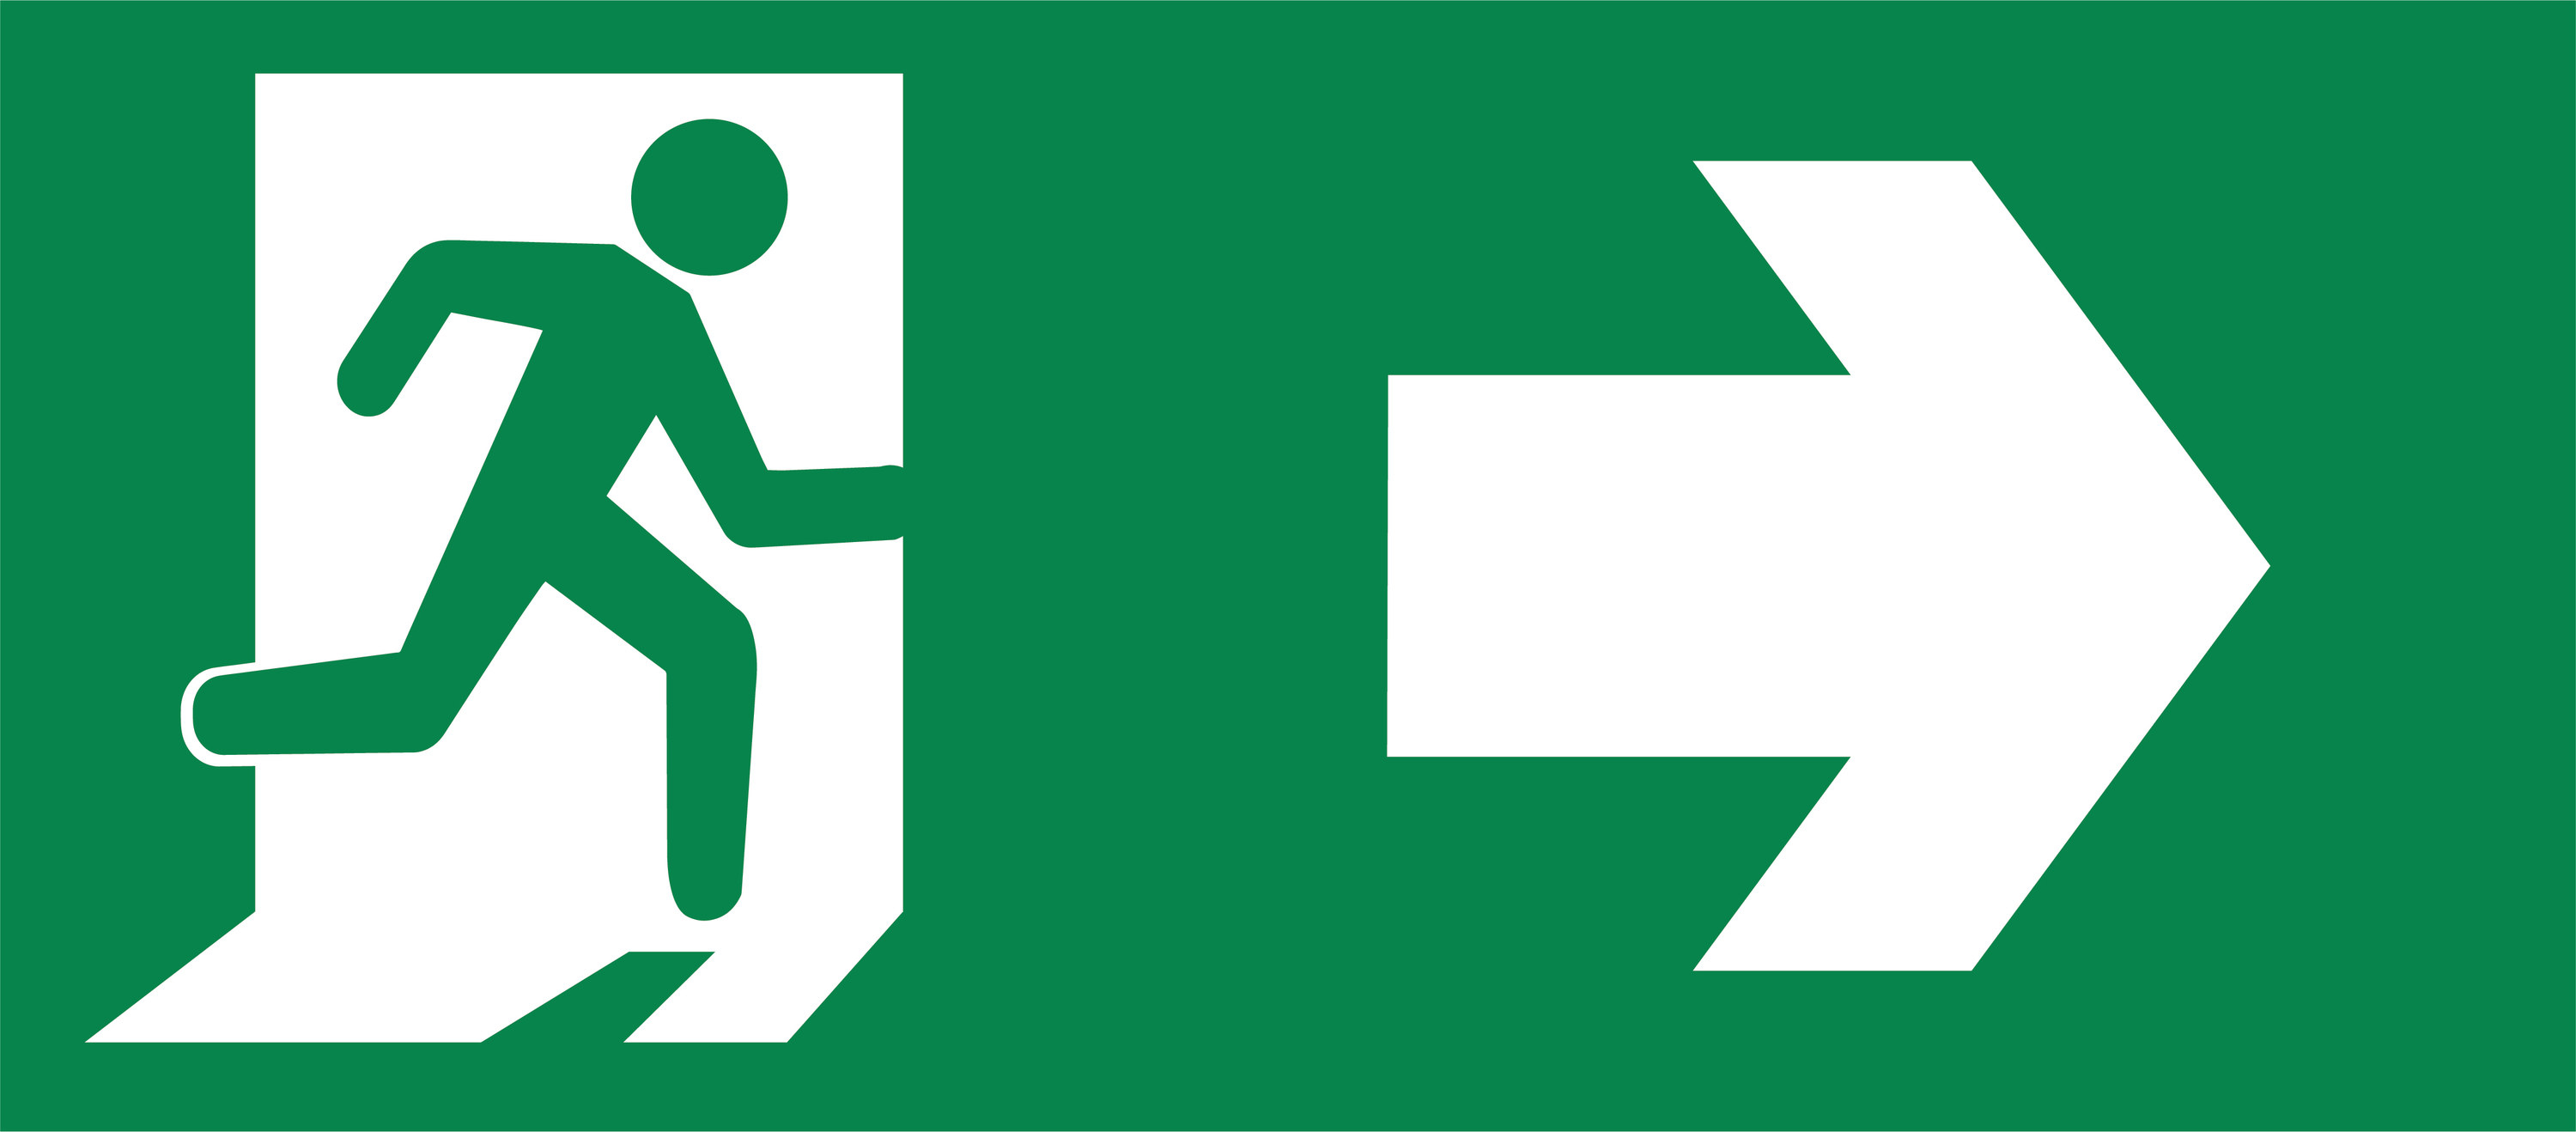 An emergency exit sign showing the way to escape